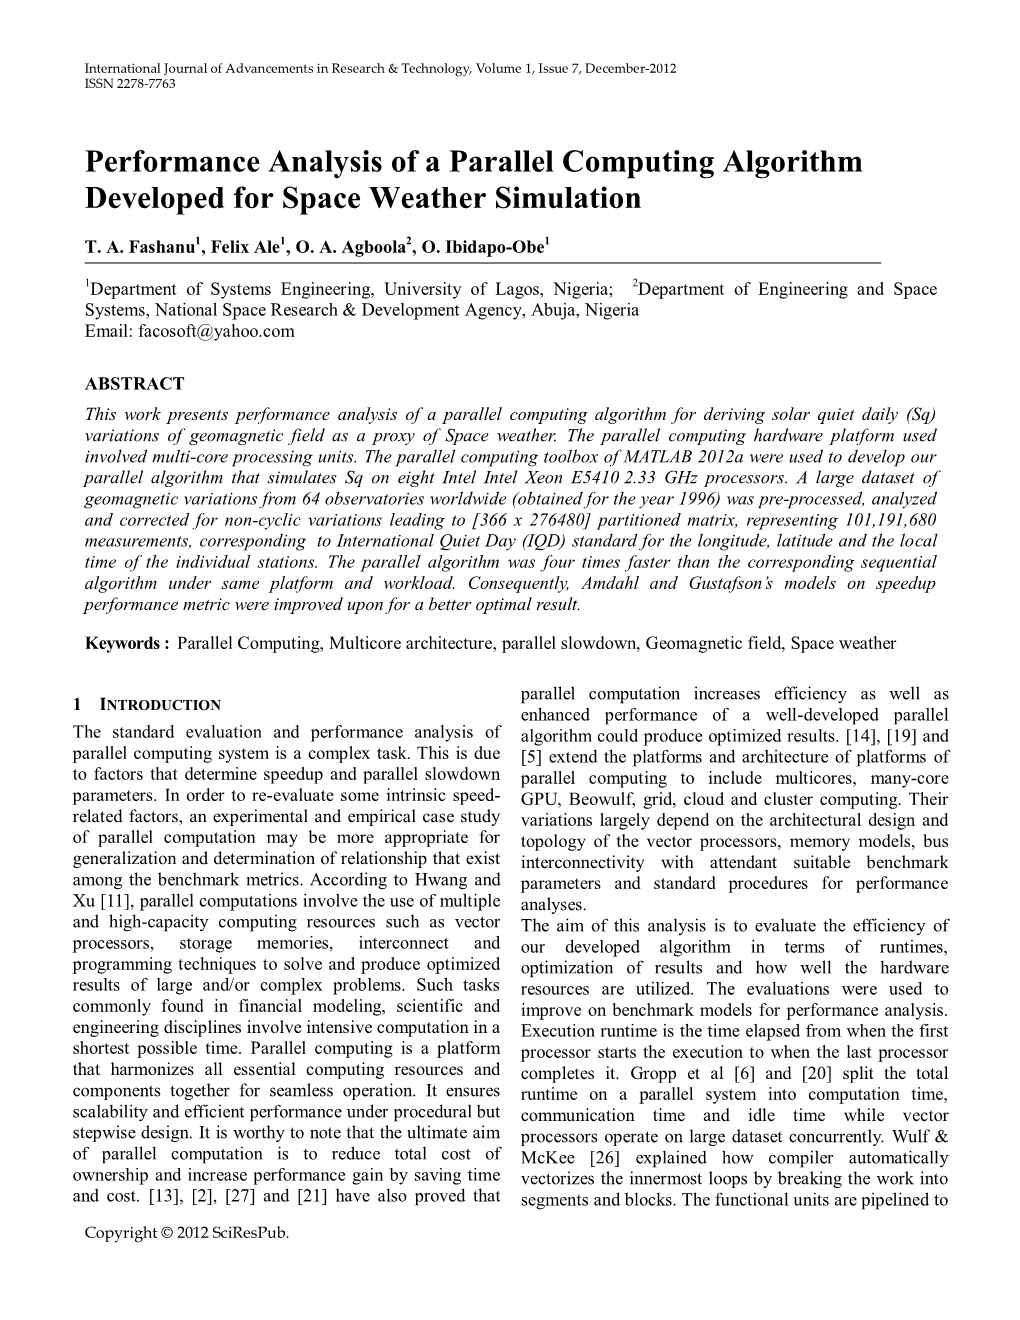 Performance Analysis of a Parallel Computing Algorithm Developed for Space Weather Simulation